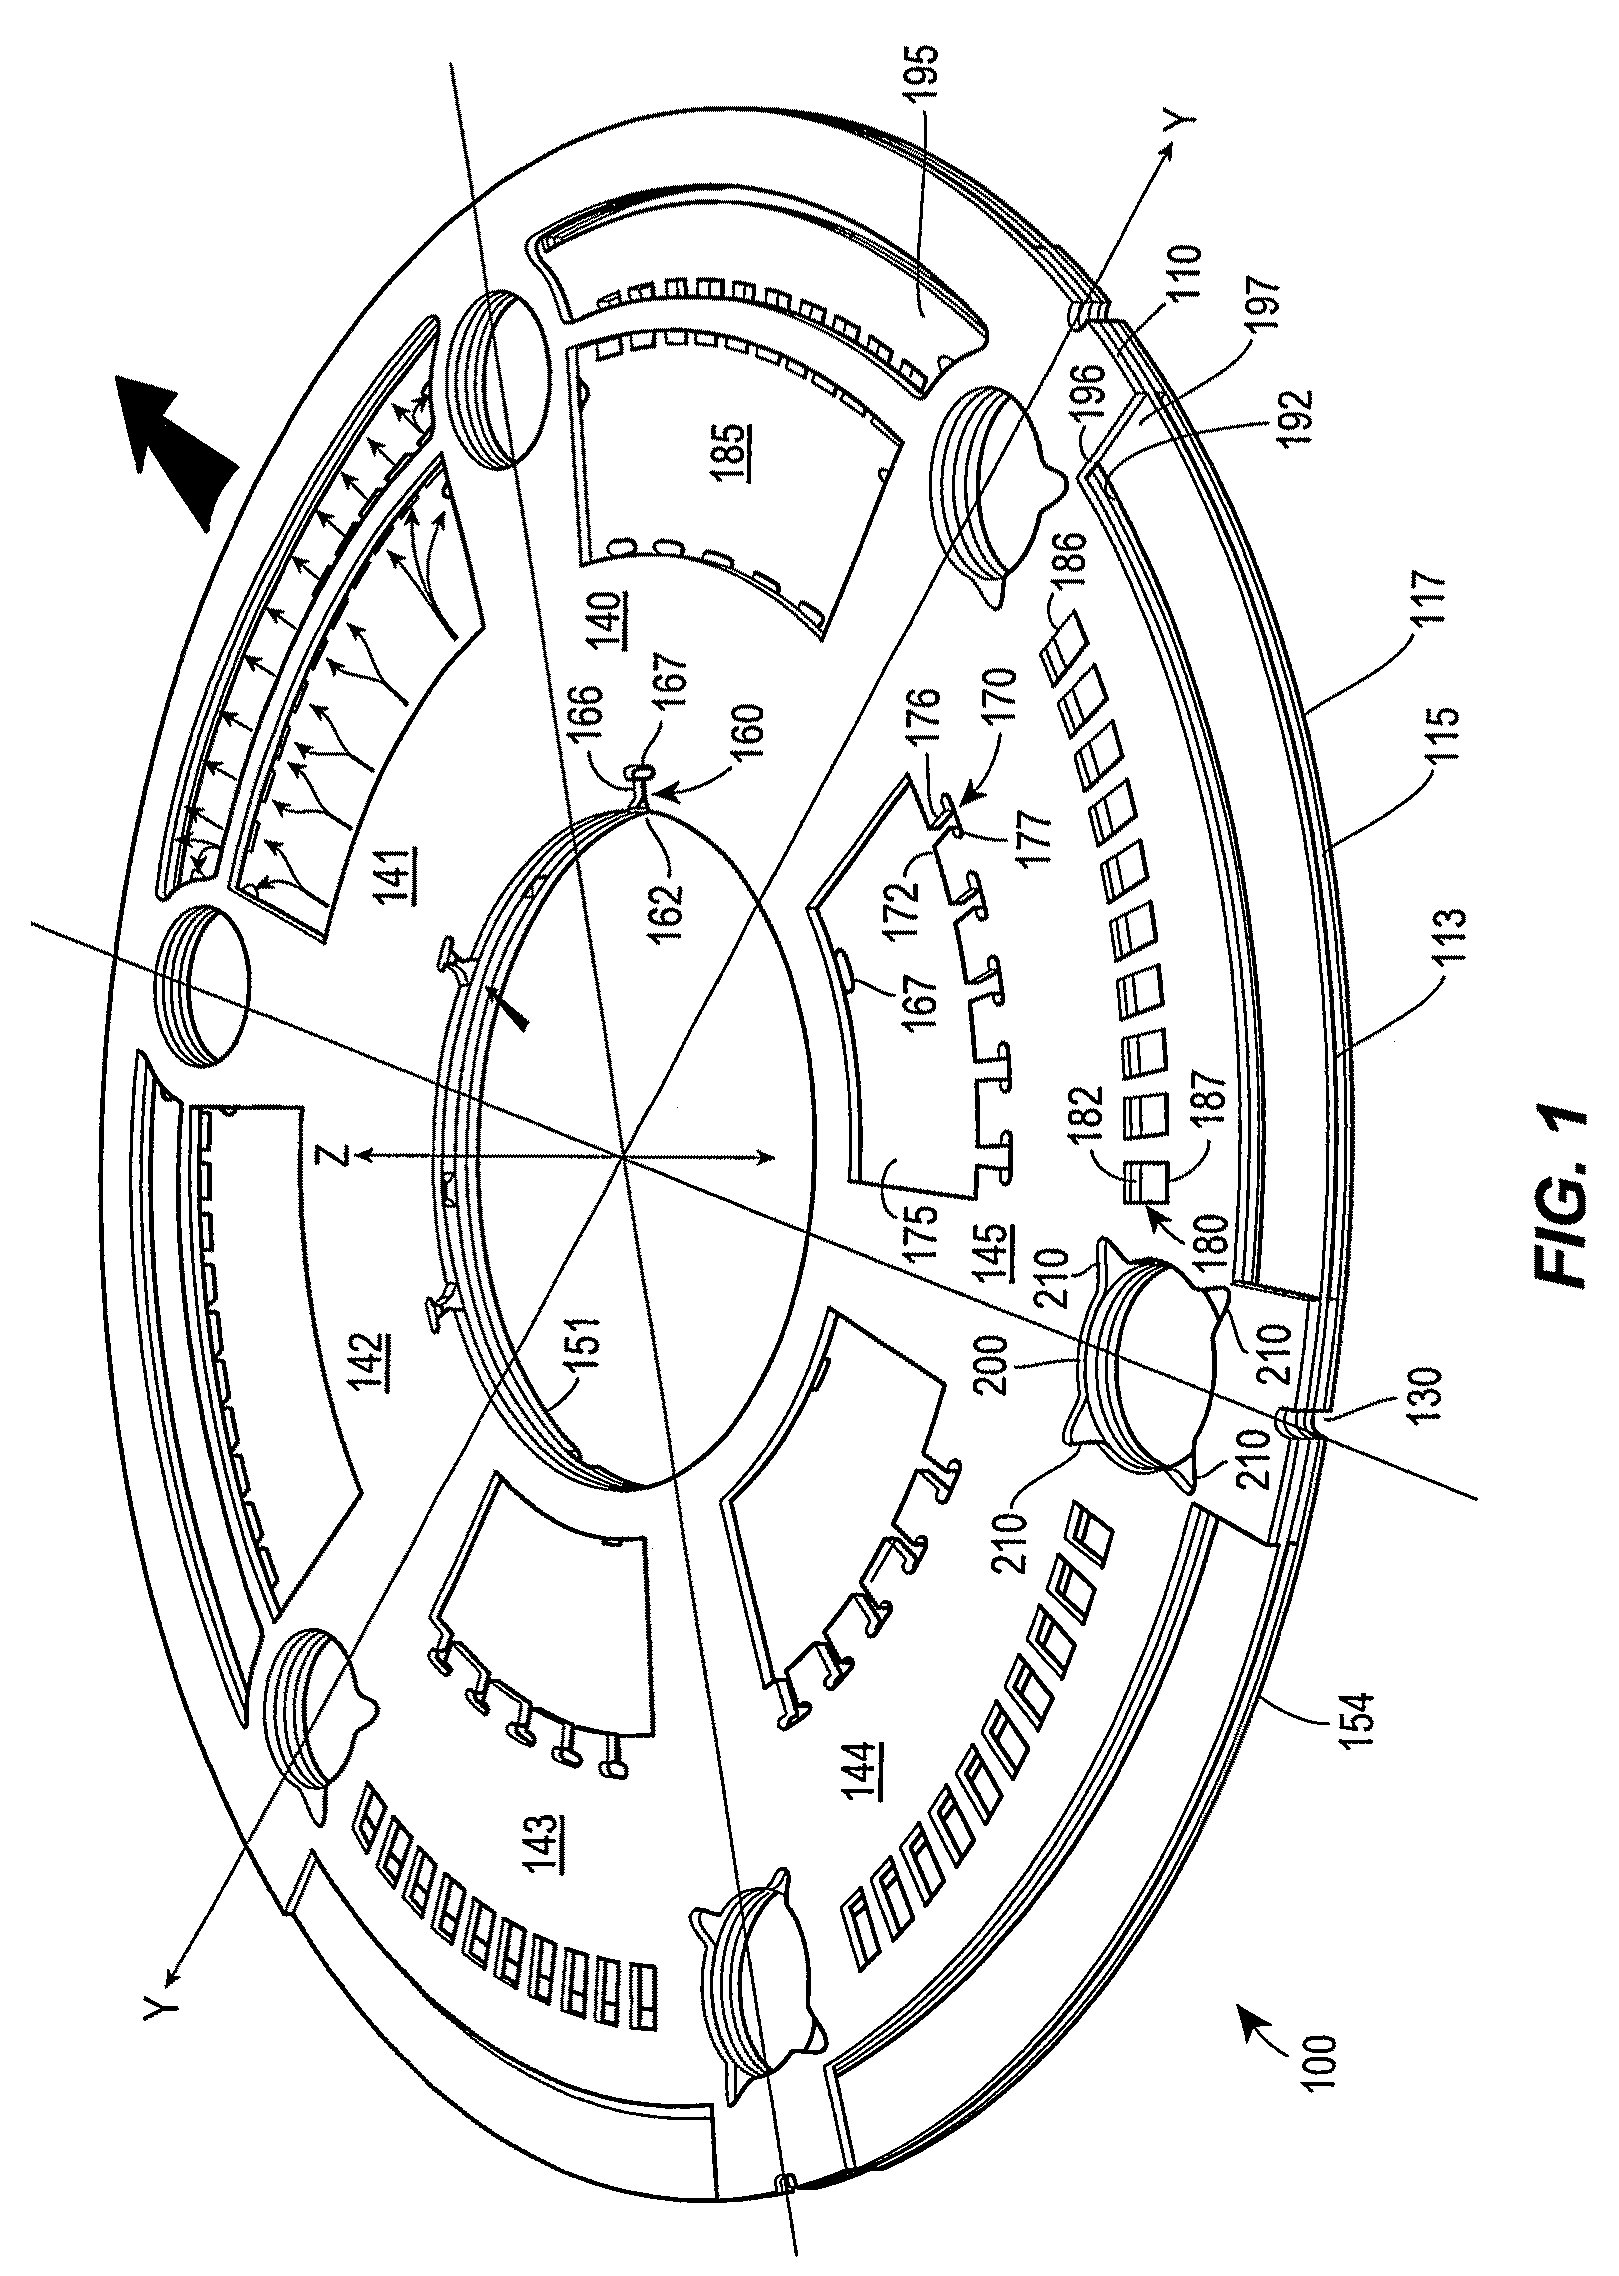 Fluid pressure reduction device for high pressure-drop ratios